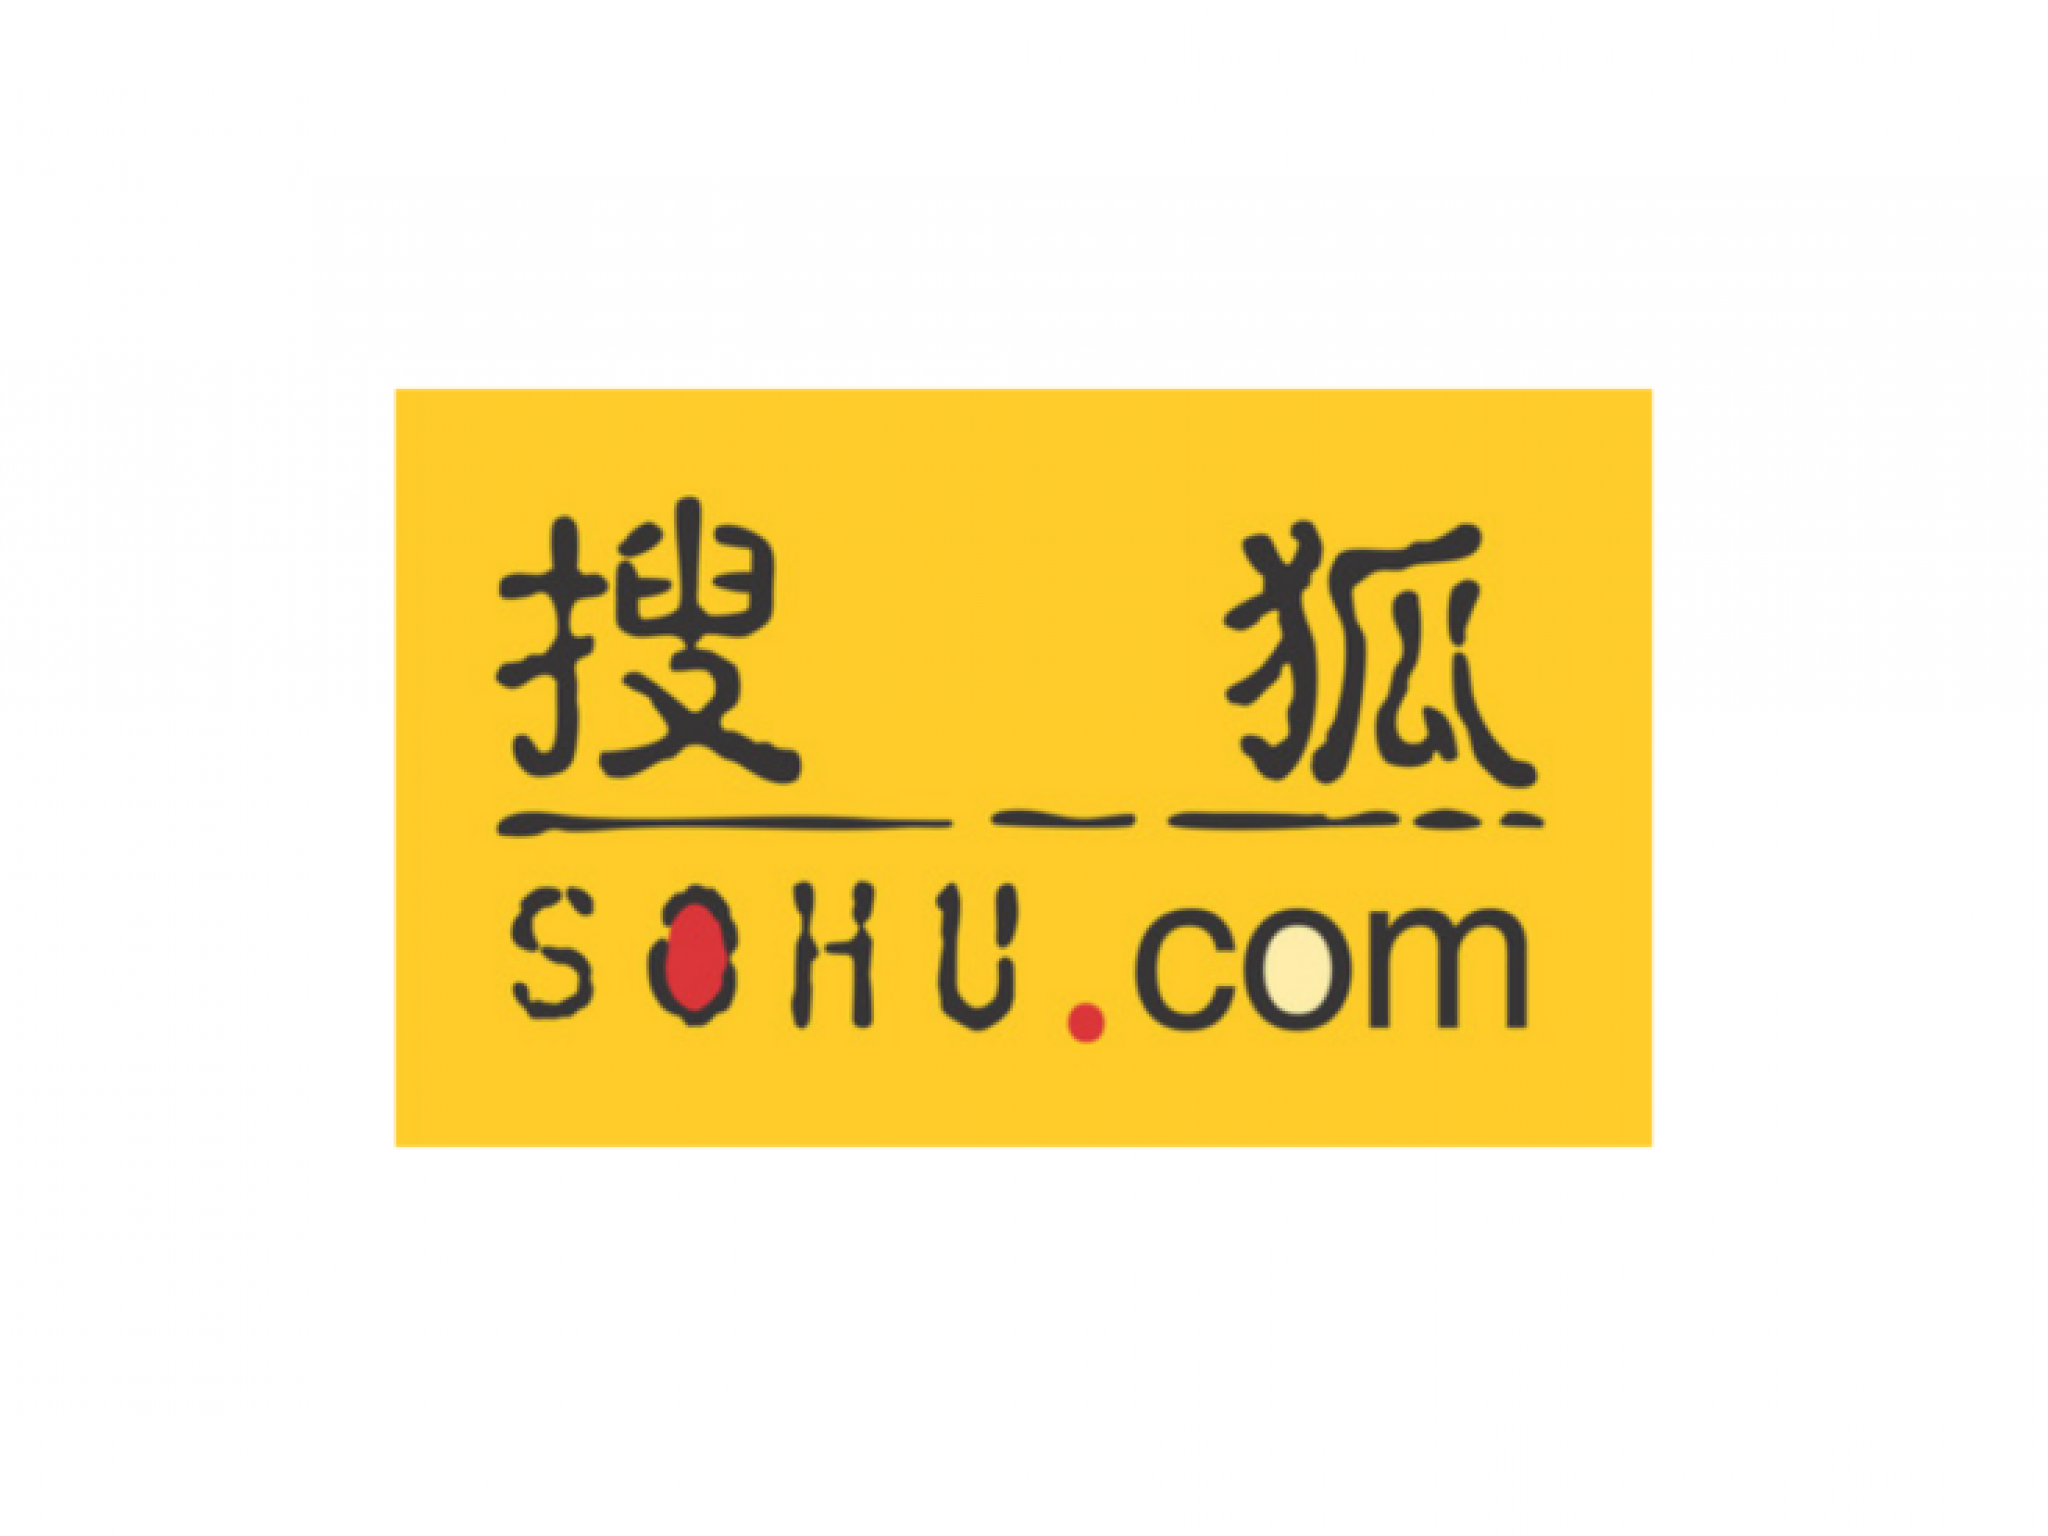  whats-going-on-with-chinese-internet-company-sohu-stock-after-q1-print 